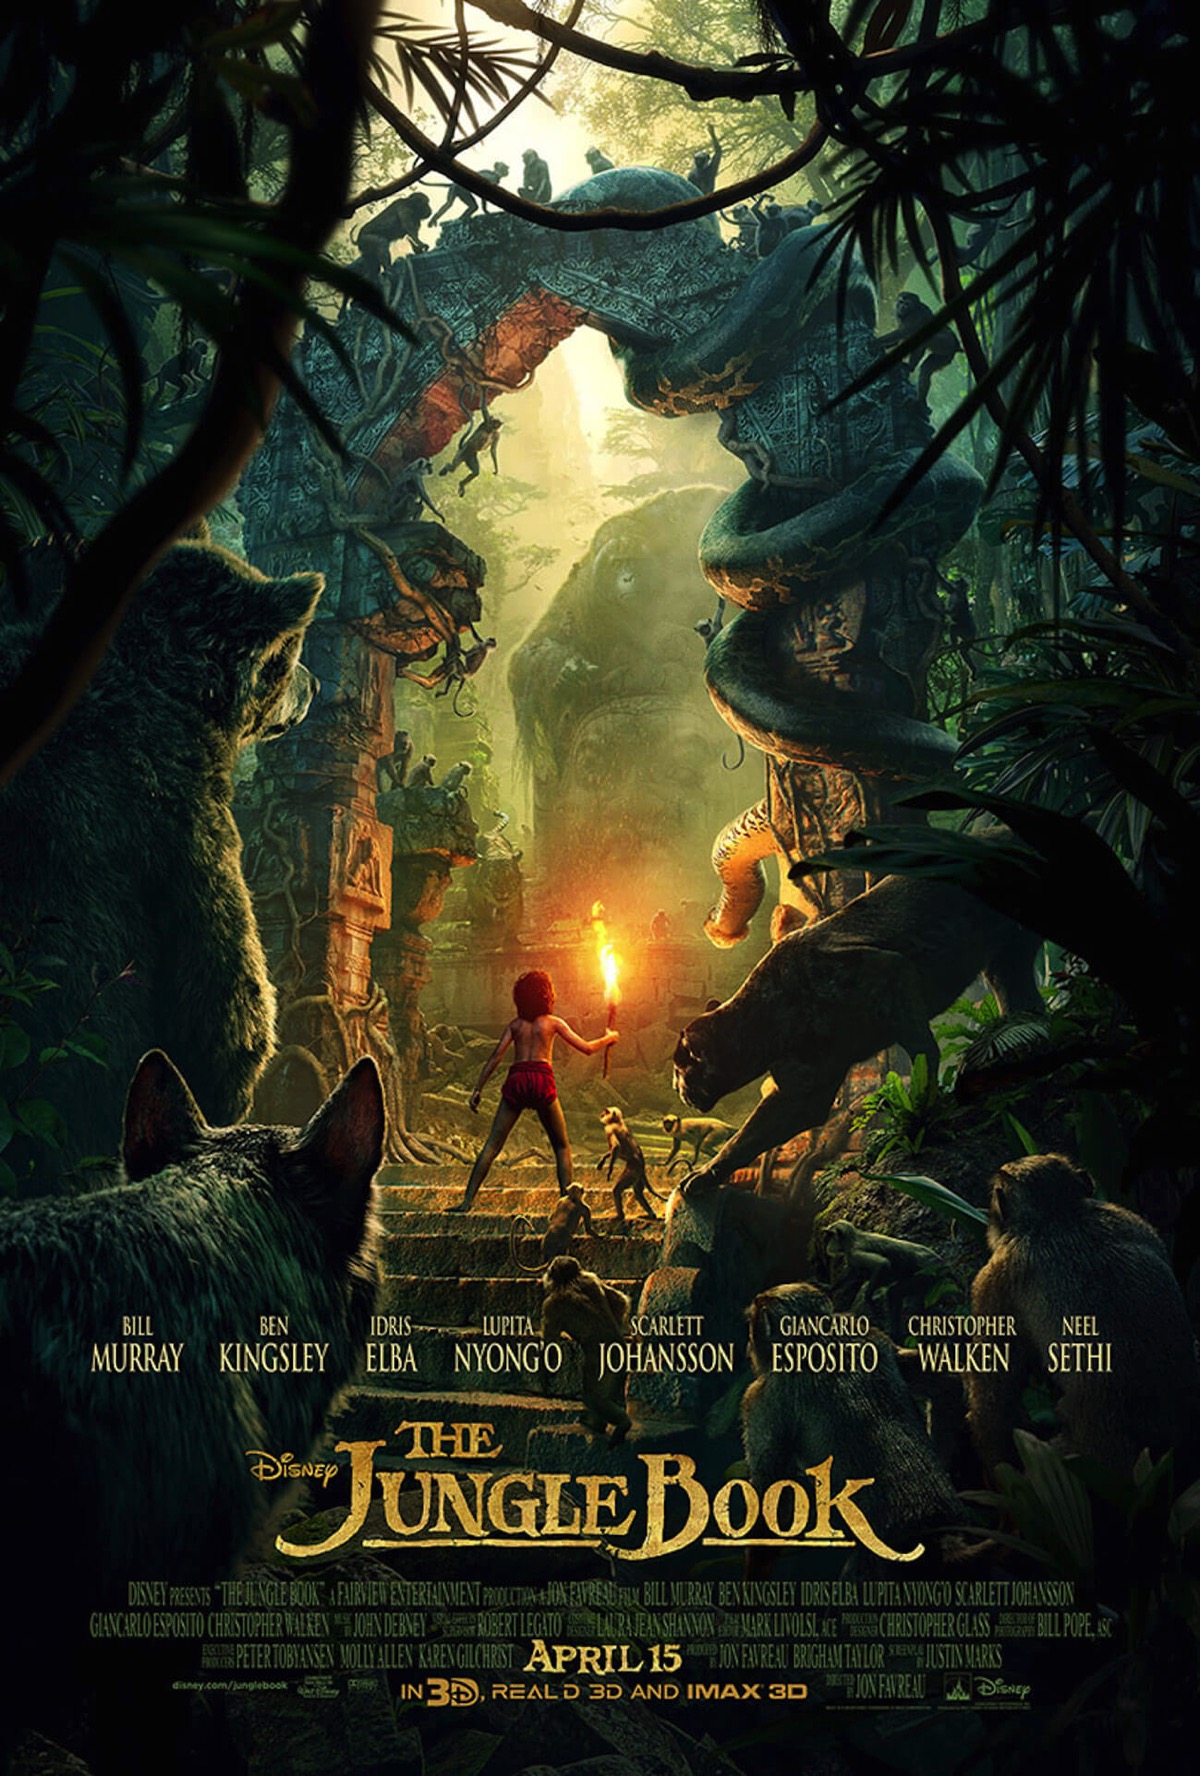 The jungle book poster 01